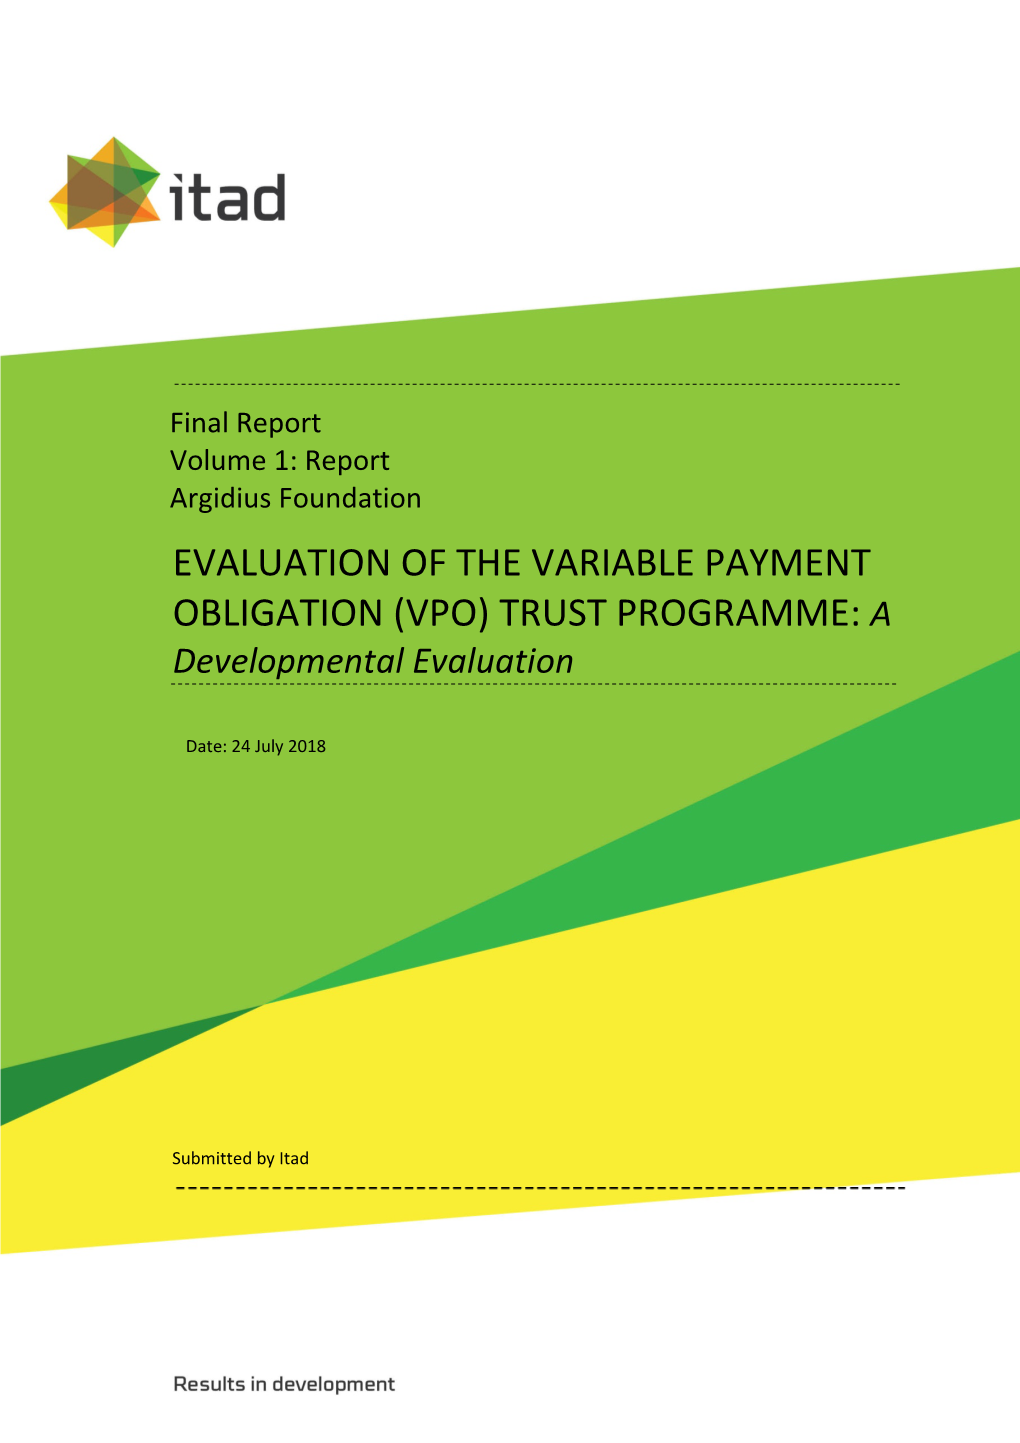 EVALUATION of the VARIABLE PAYMENT OBLIGATION (VPO) TRUST PROGRAMME: a Developmental Evaluation